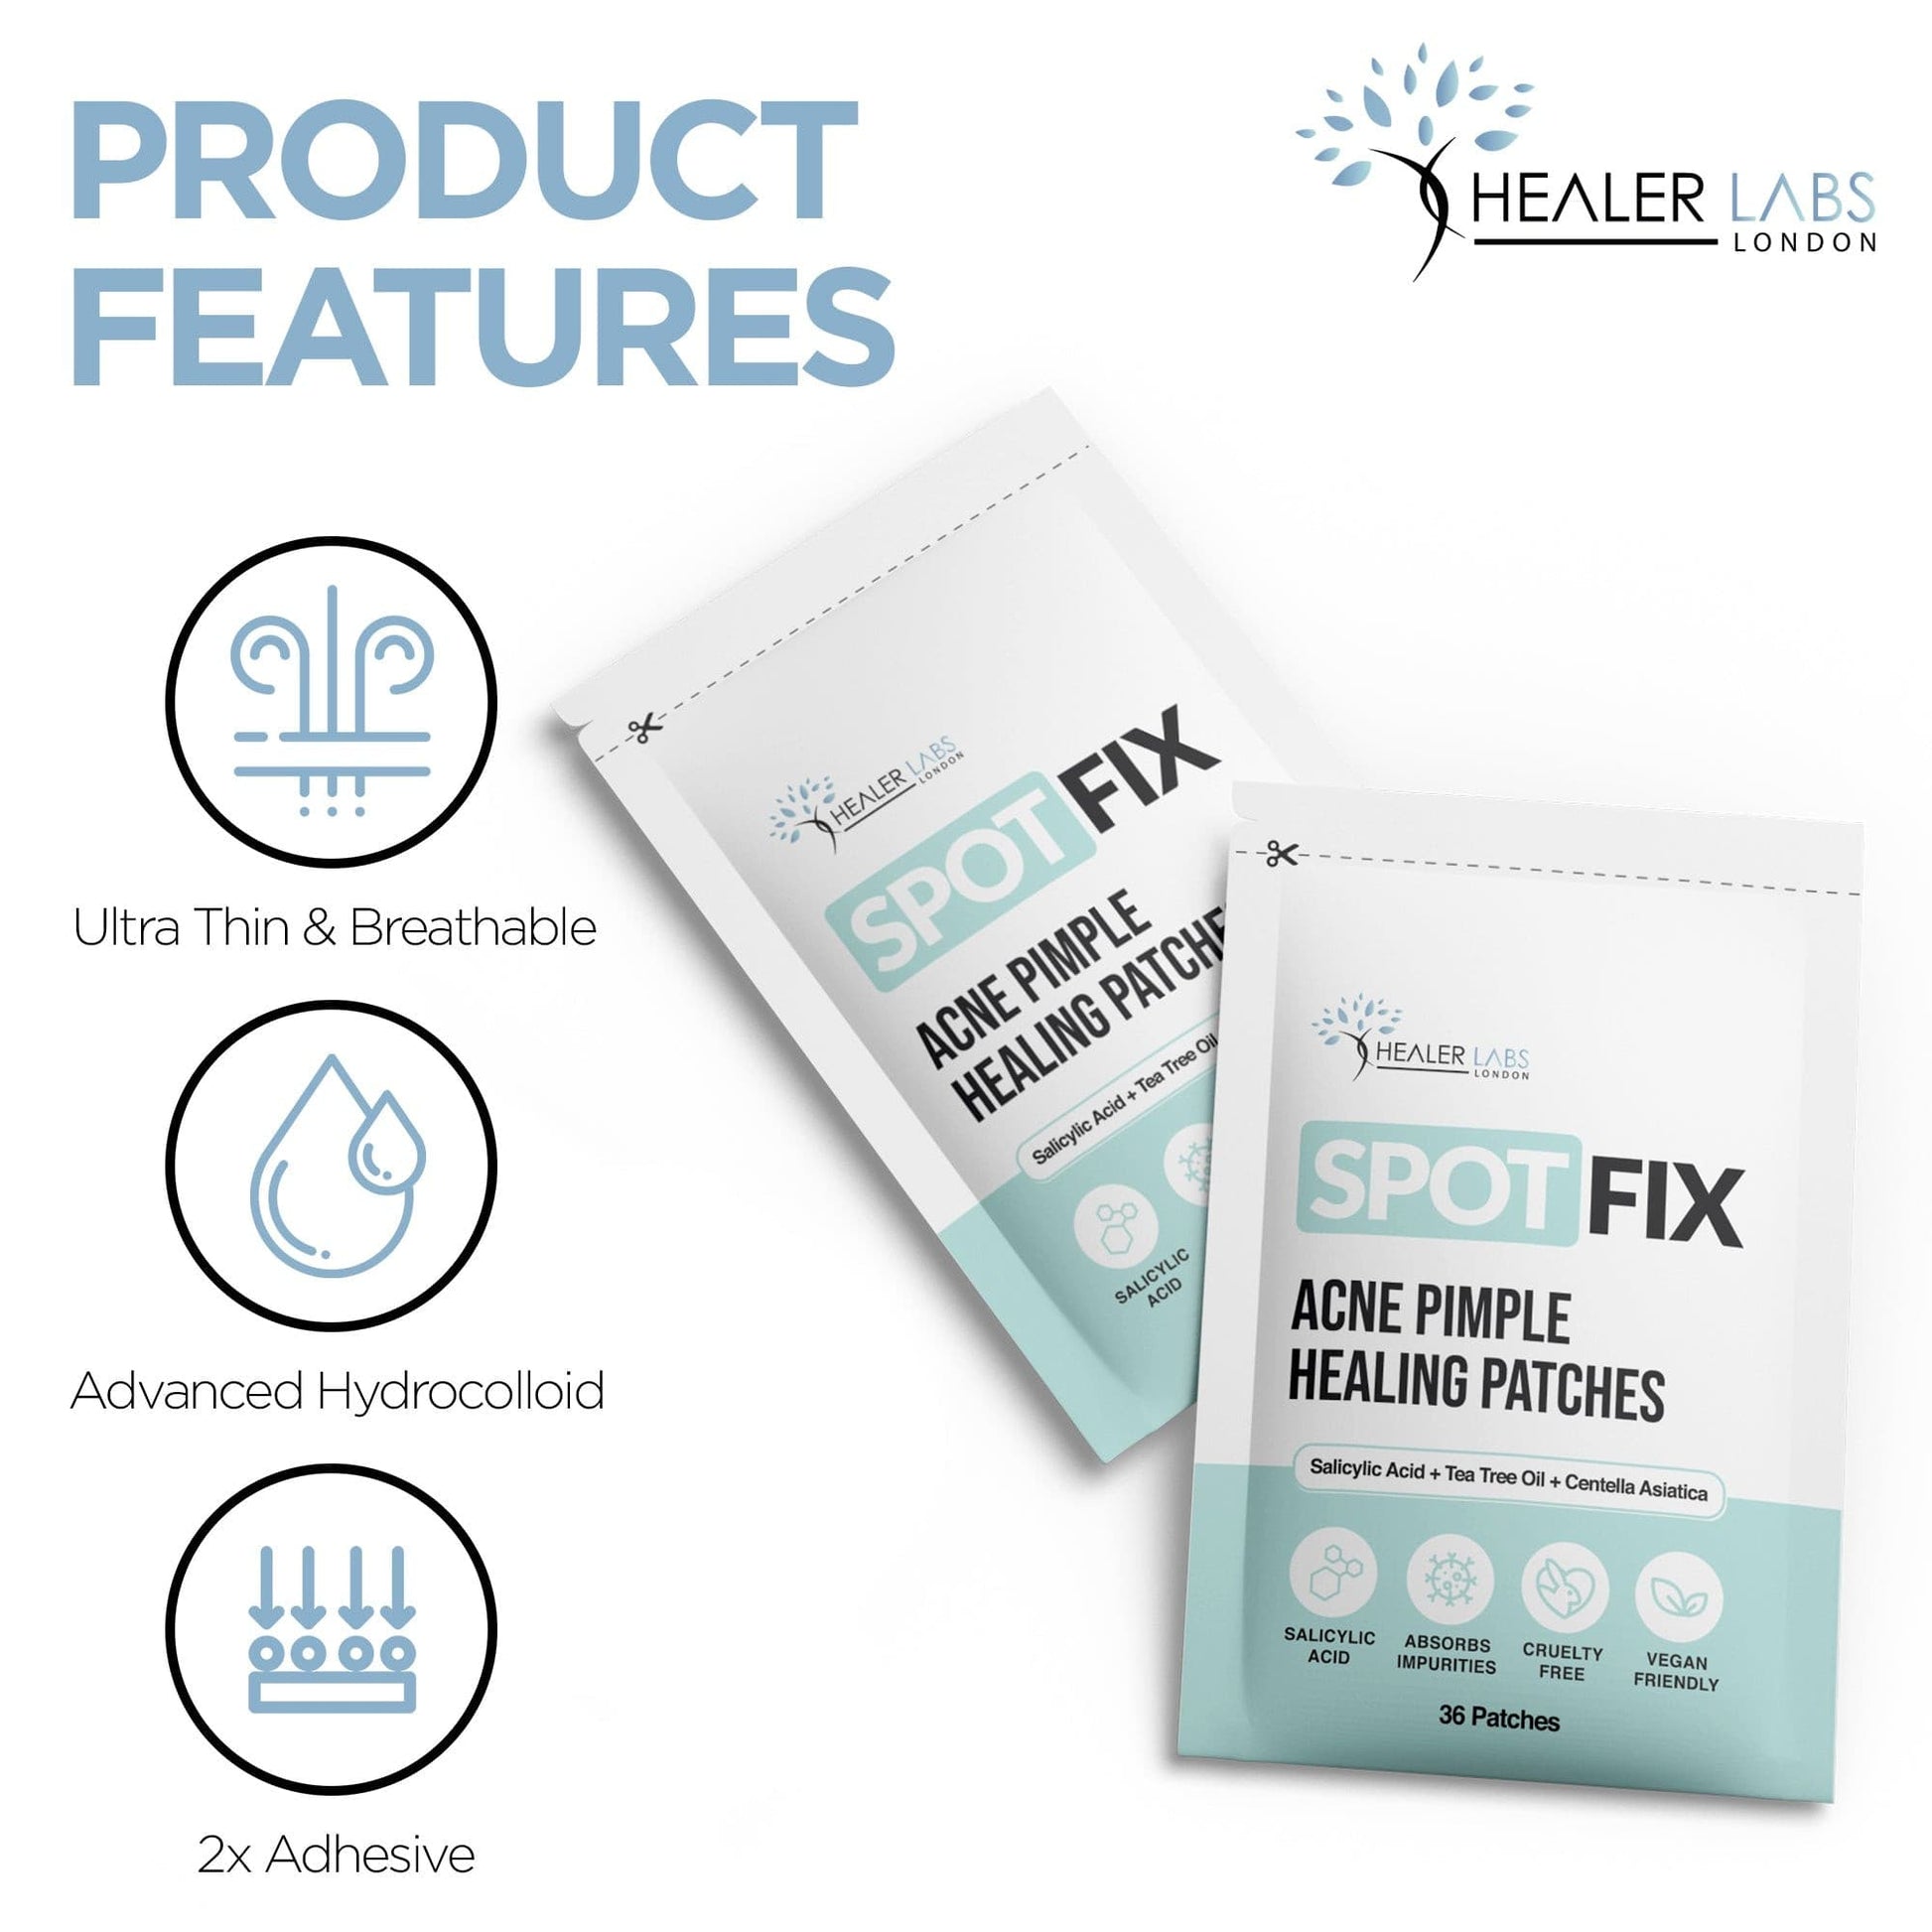  Healer Labs - Acne Pimple Healing Hydrocolloid Patch With Salicylic Acid+Tea Tree Oil+Centella Asiatica - The Beauty Corp.